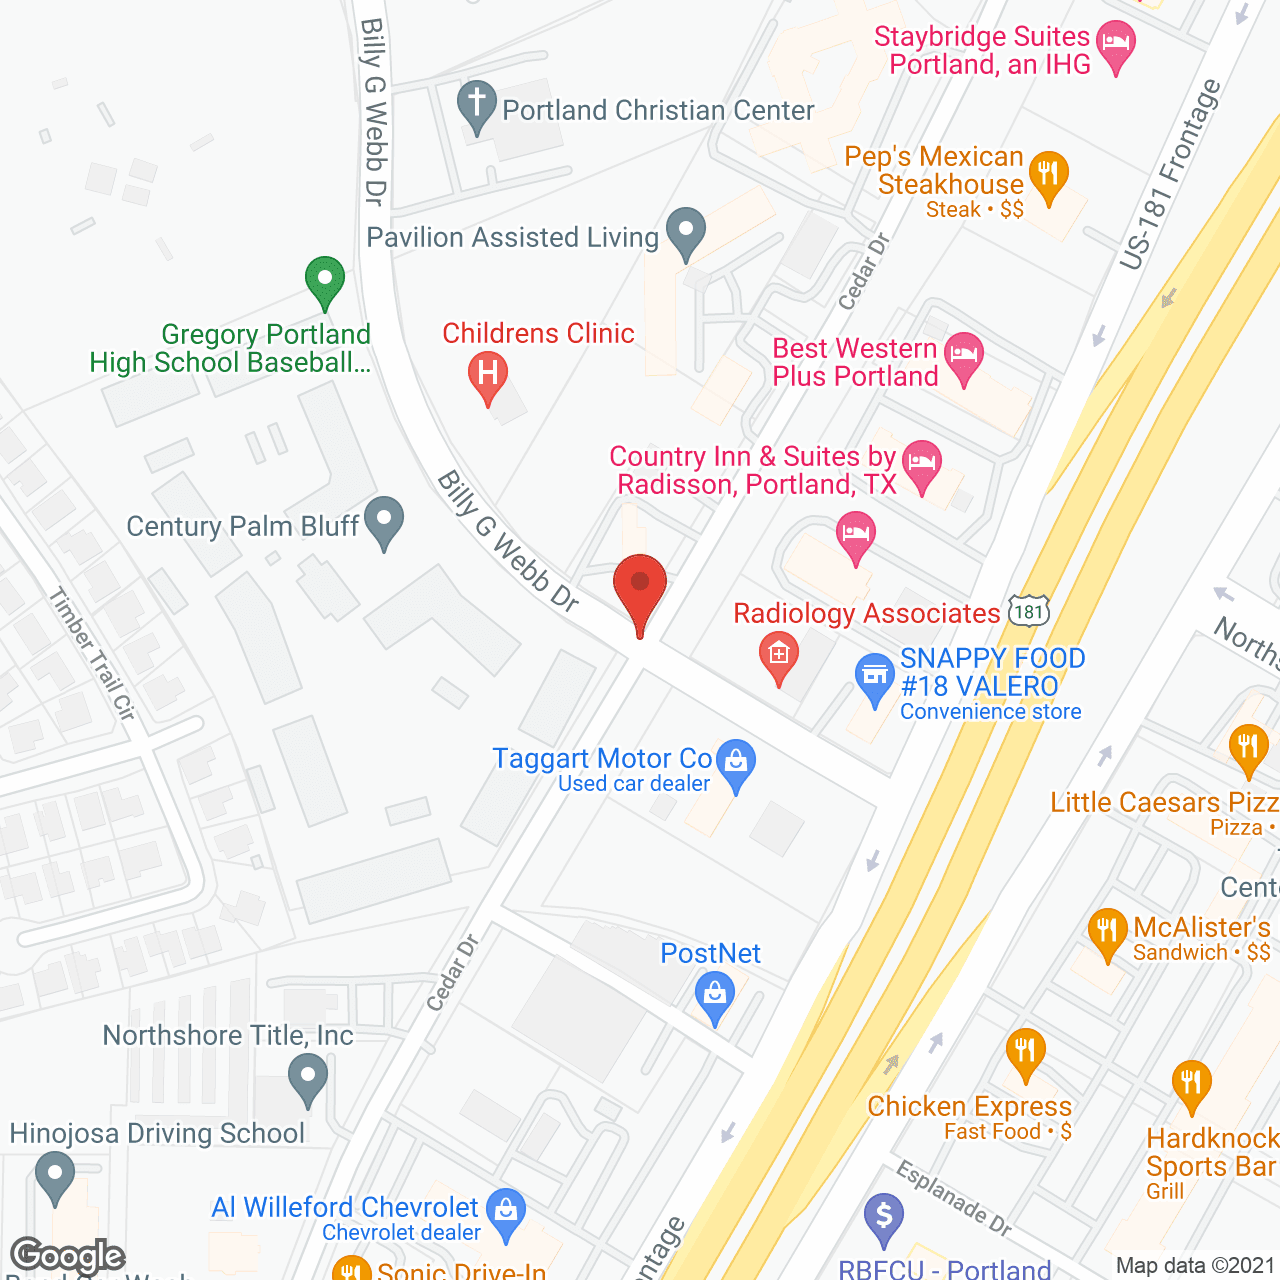 Pavilion Assisted Living in google map